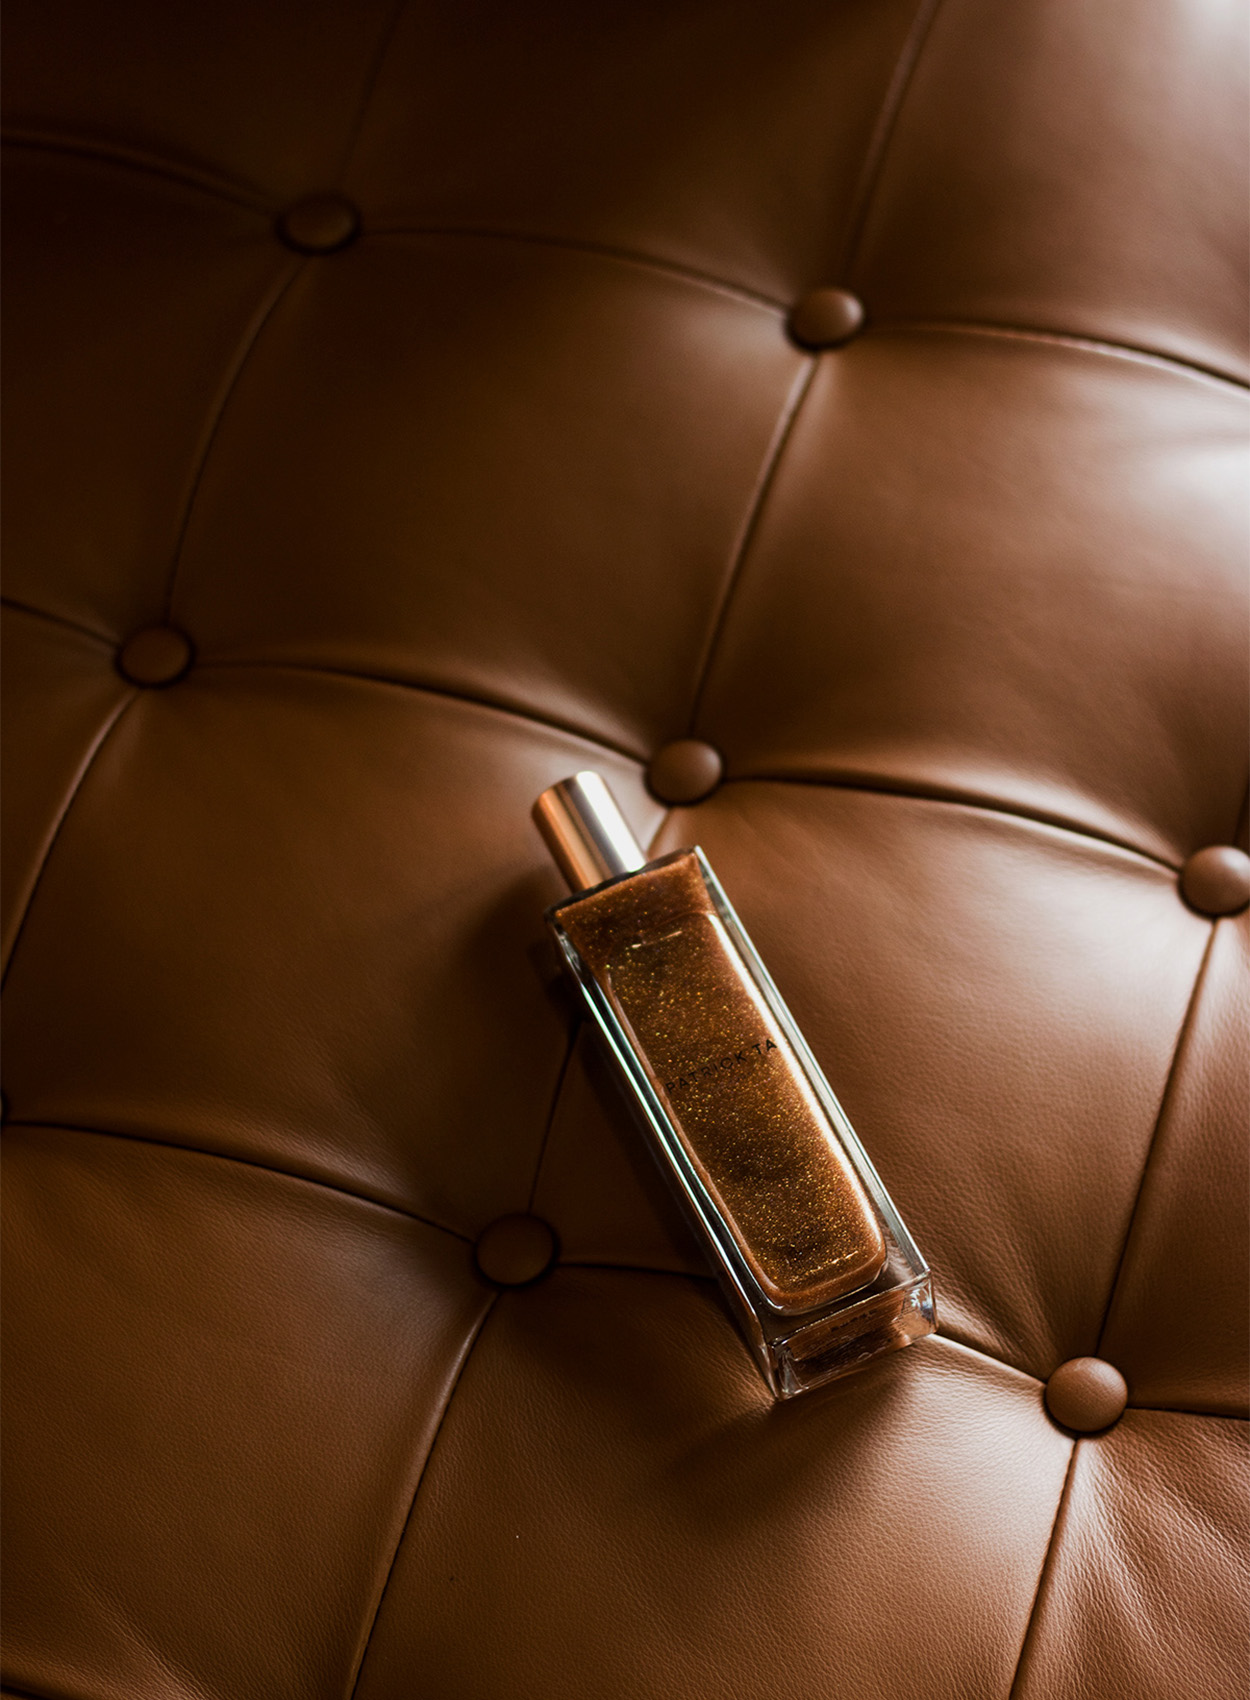 BA FCP work by Tara Lea. mage displays an editorial image of a product bottle against luxury brown leather.